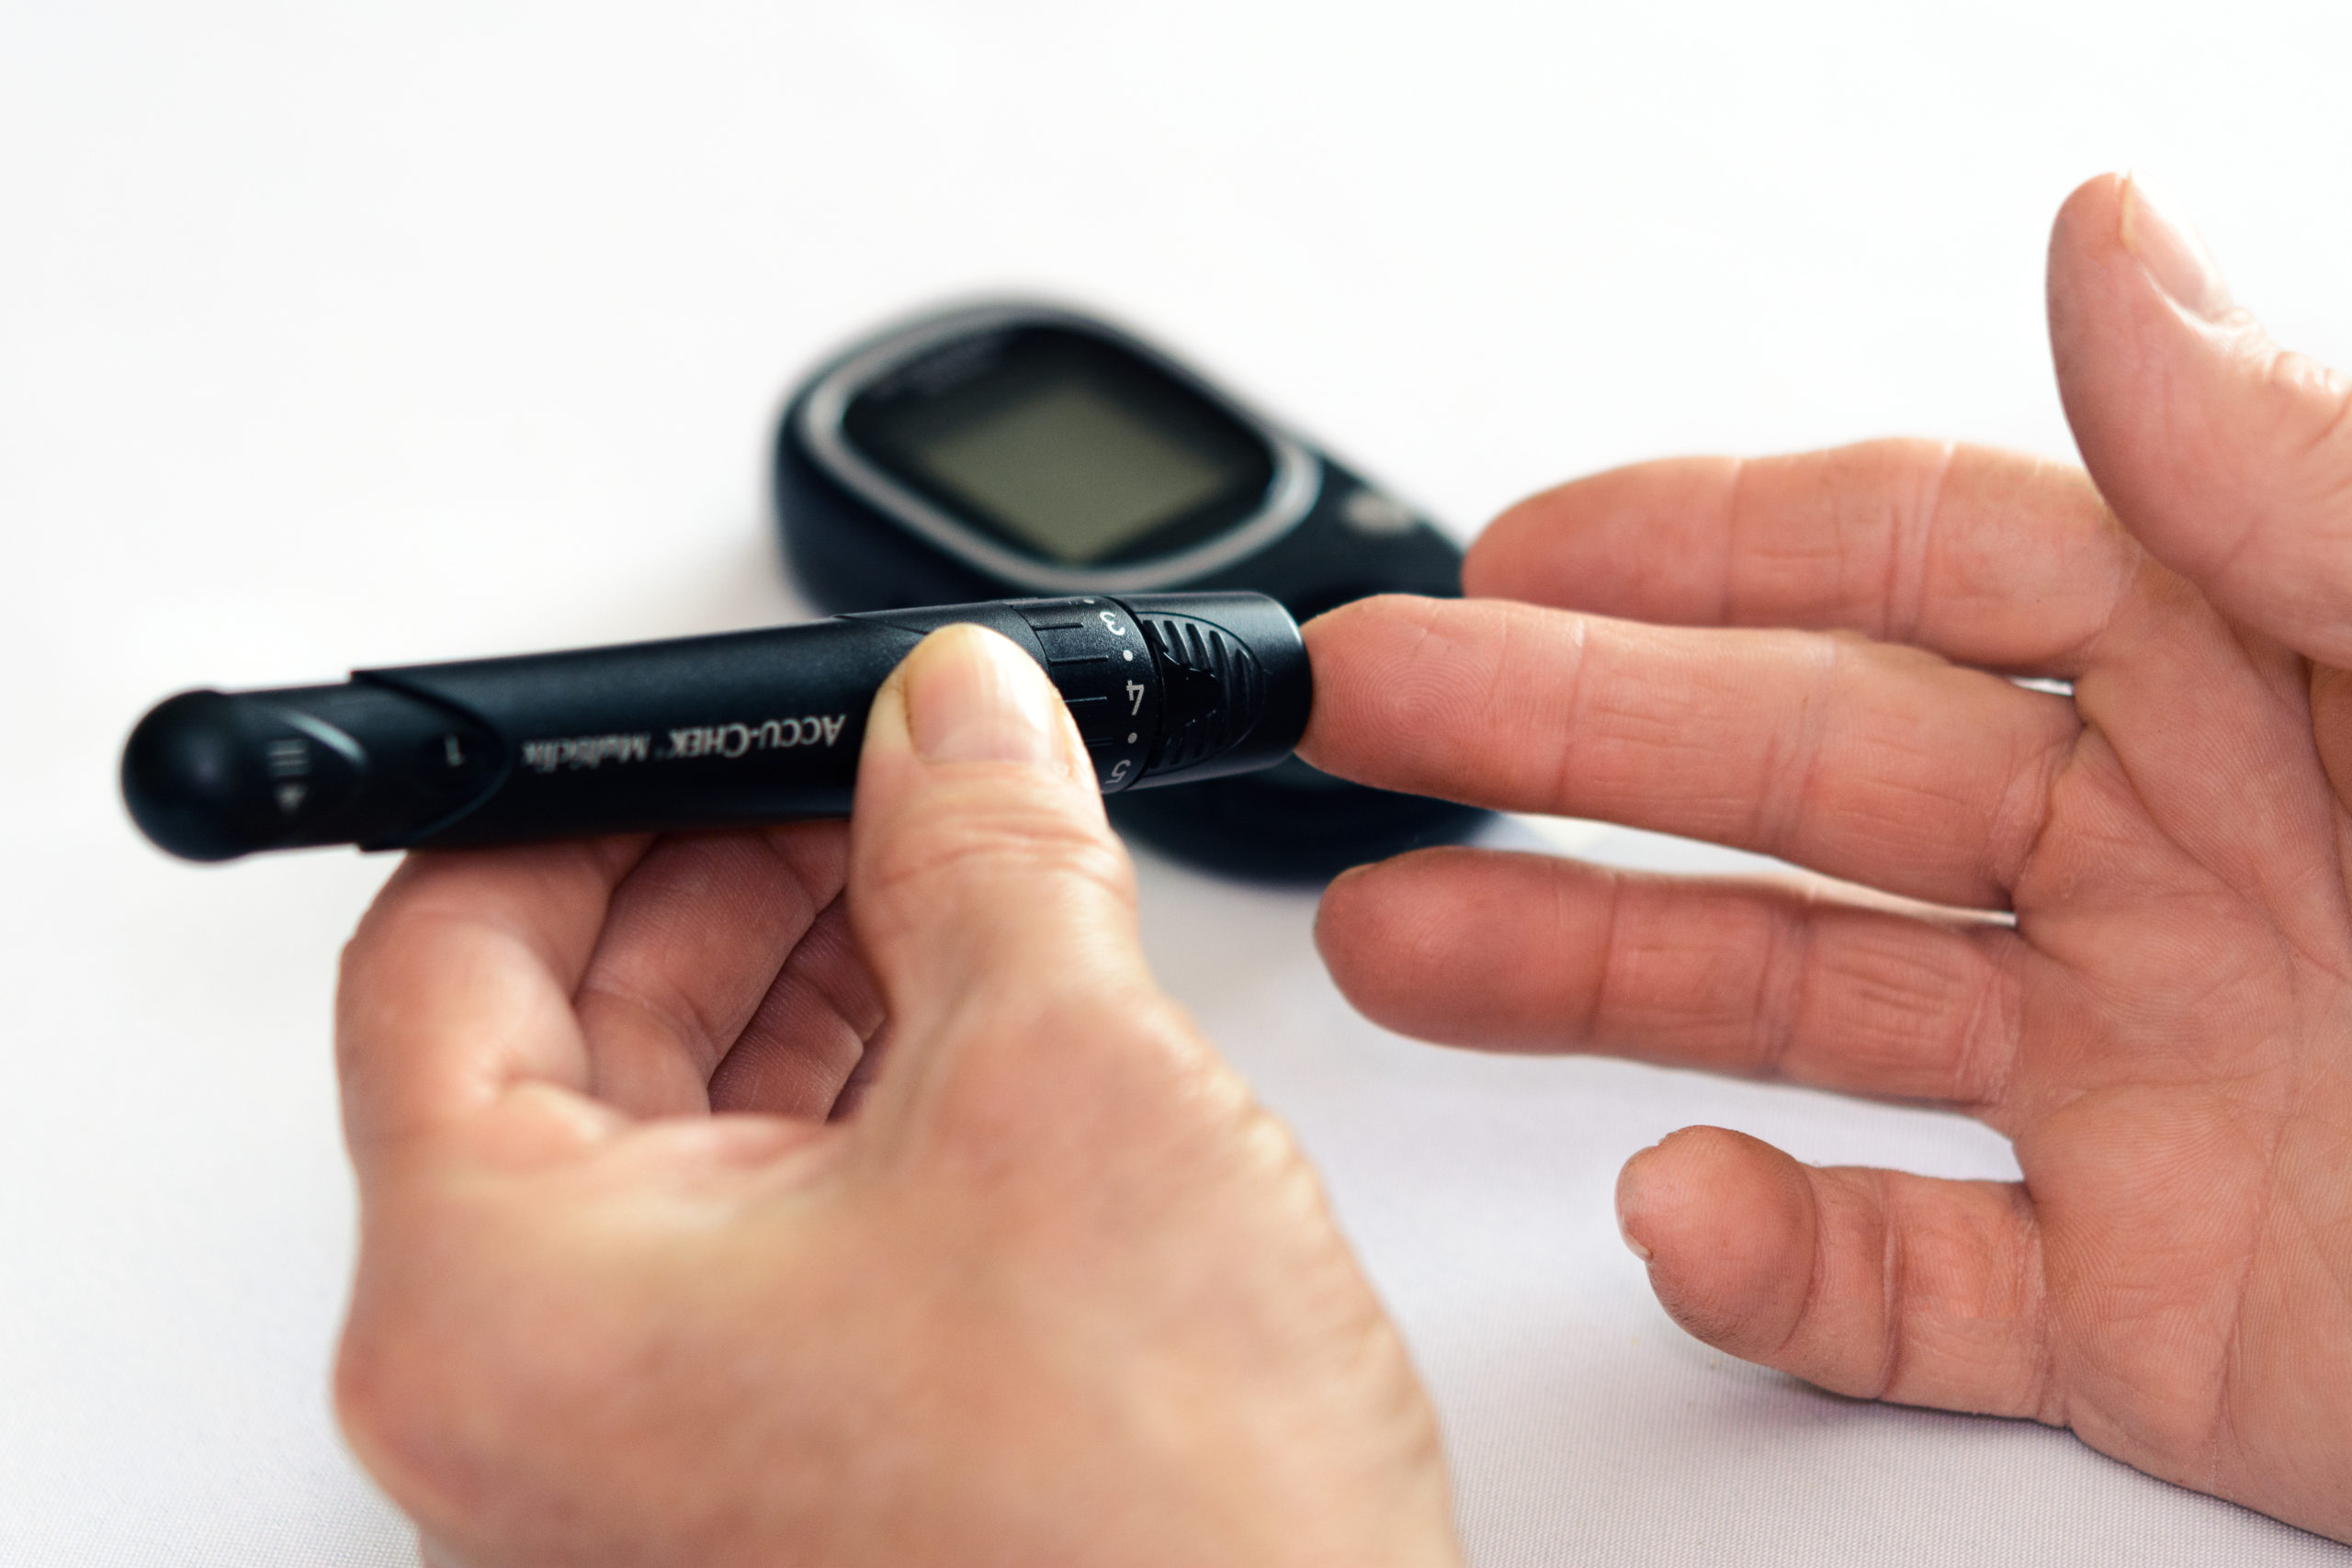 New study aims to help older adults with type 2 diabetes cut back on medications